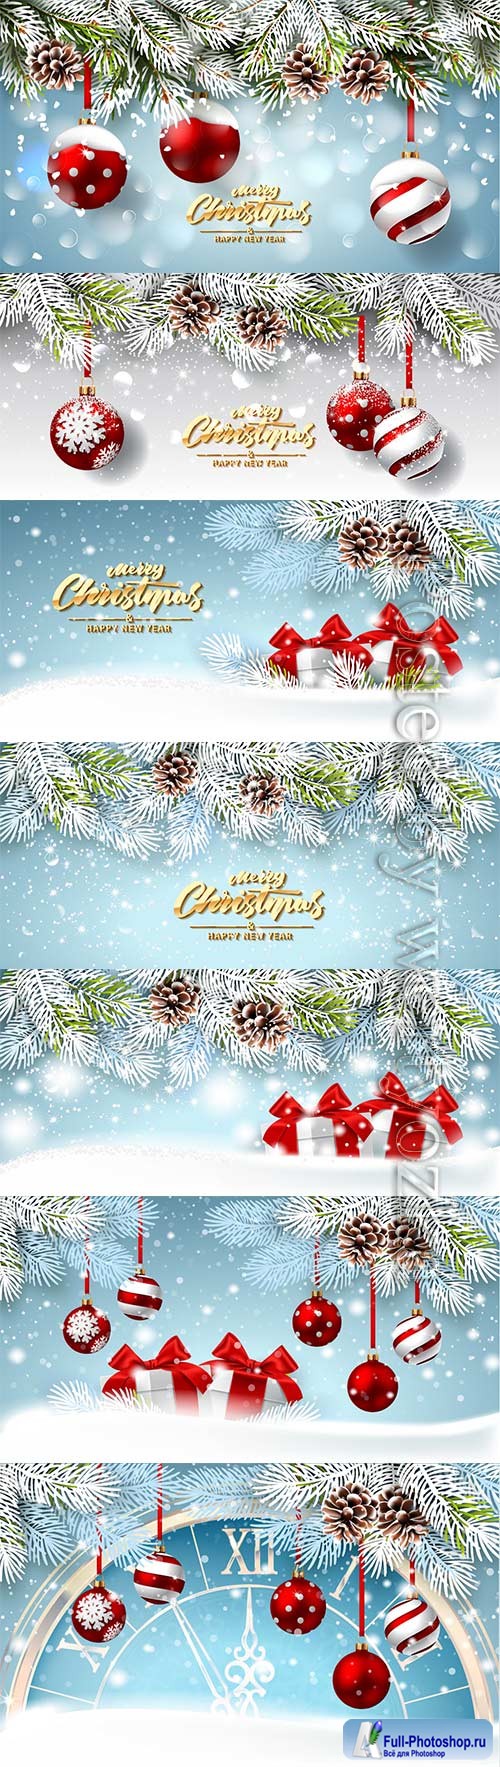 Christmas card with gifts on a winter background of snow-